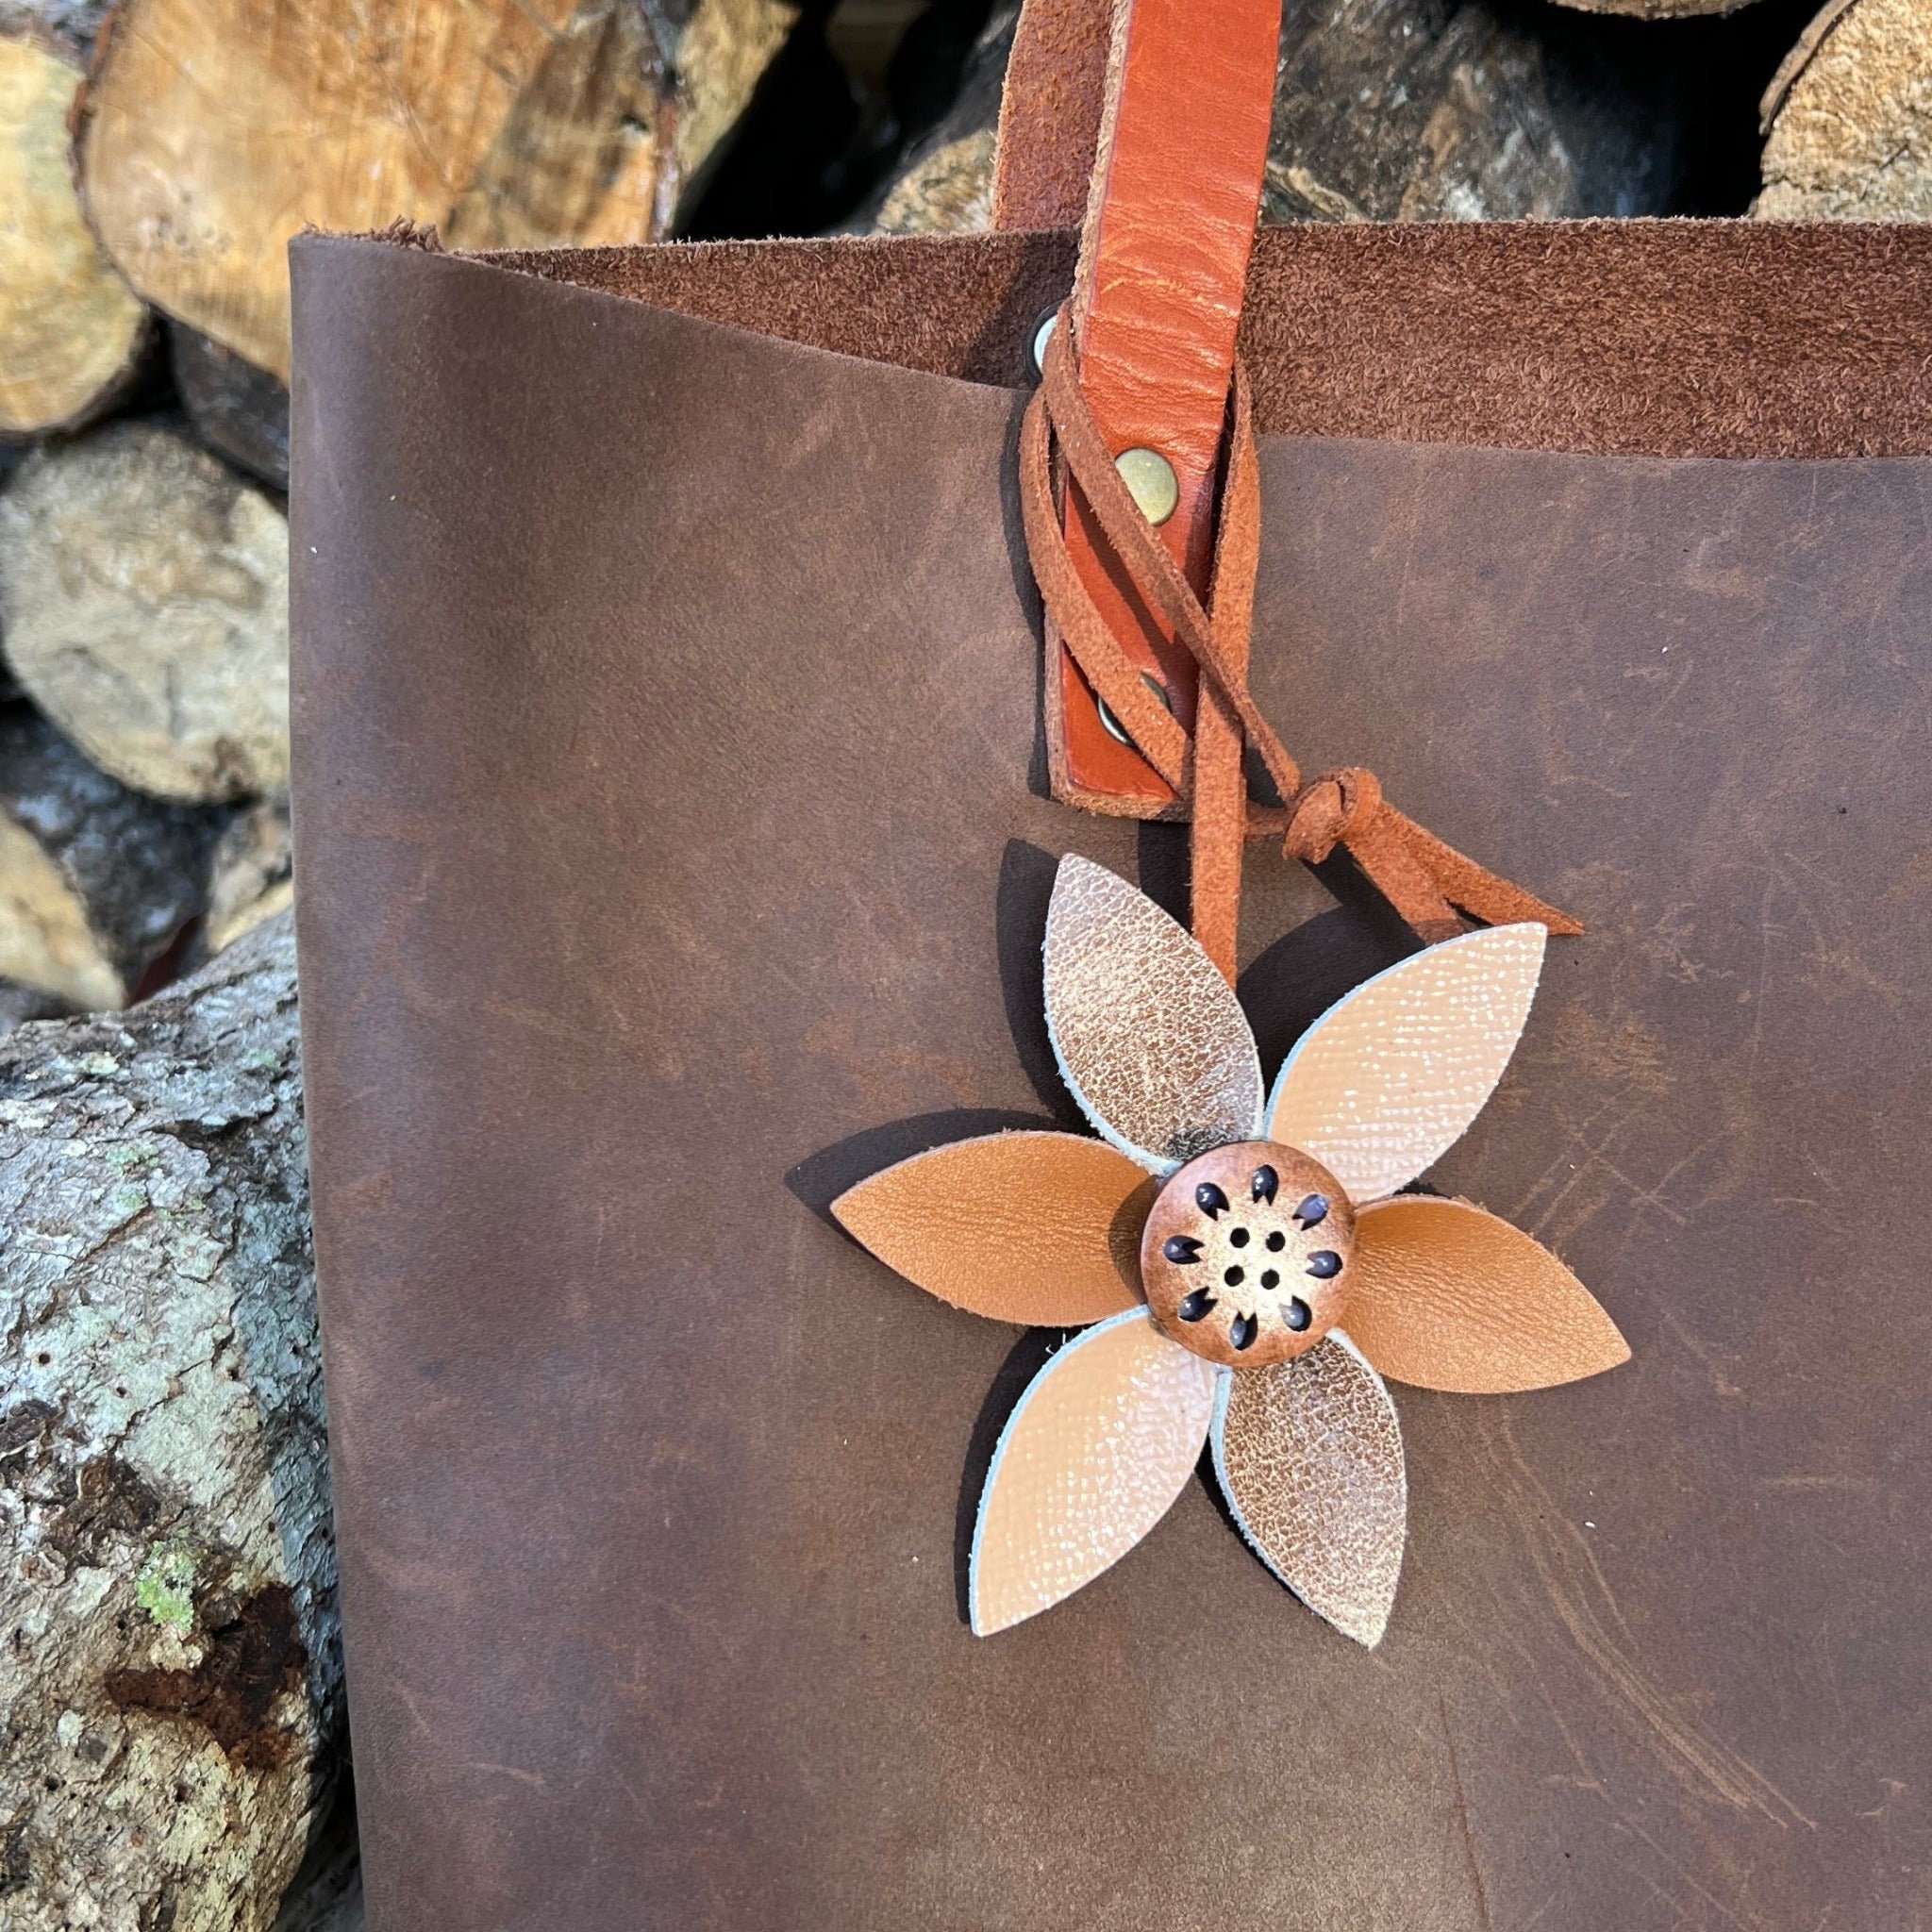 Leather Flower Bag Charm - Large Flower with Loop - Brown and White